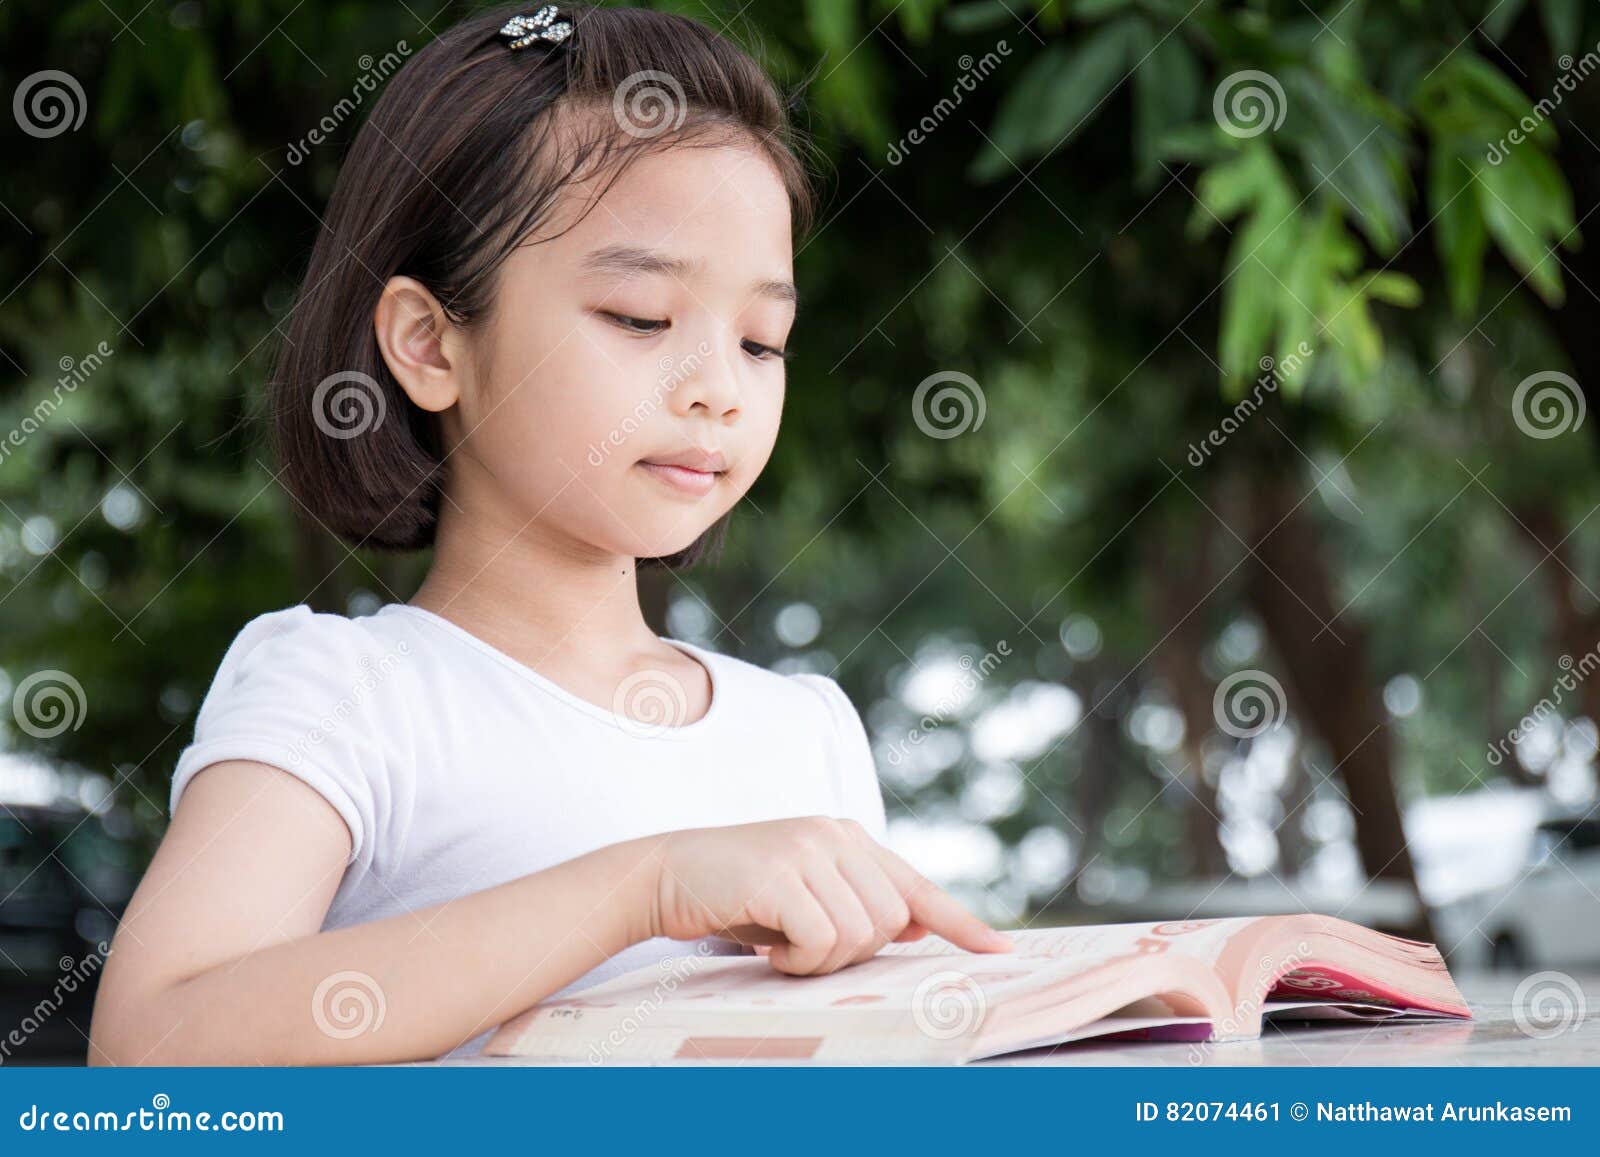 Little Asian Child Reading a Book Stock Image - Image of middle, lovely ...